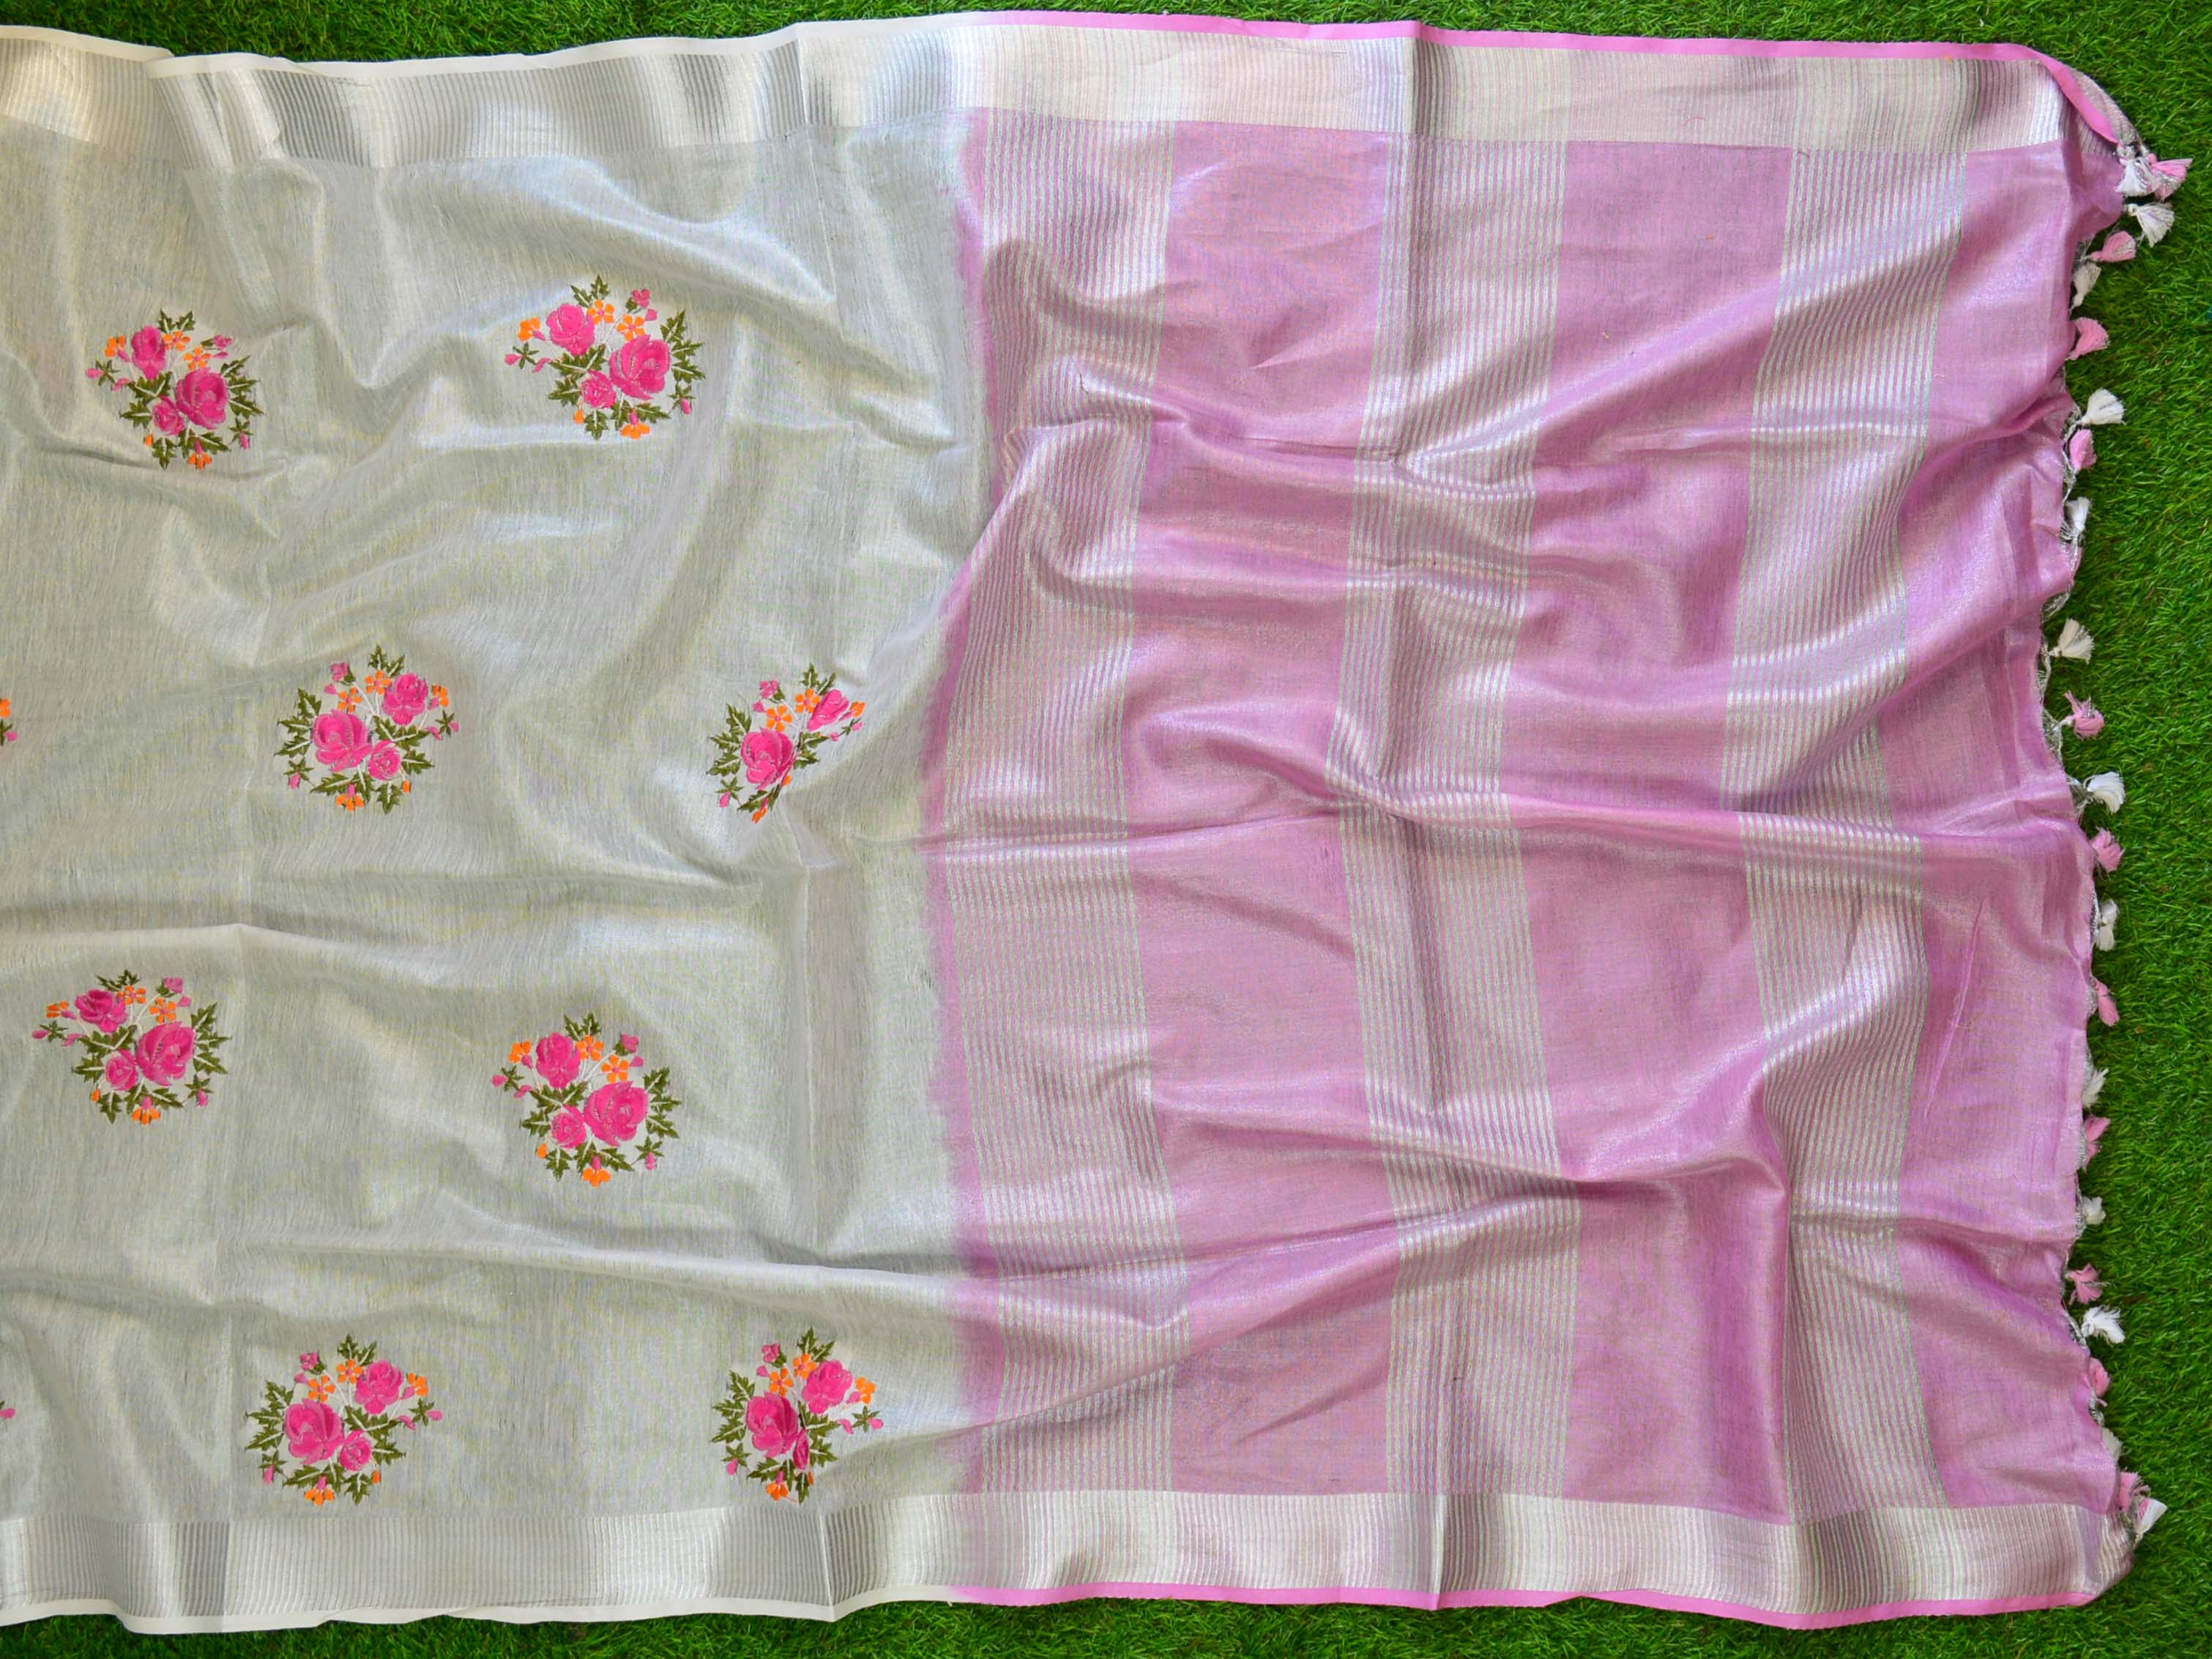 Banarasee Handloom Pure Linen By Tissue Embroidered Saree-Silver(Pink Shade)